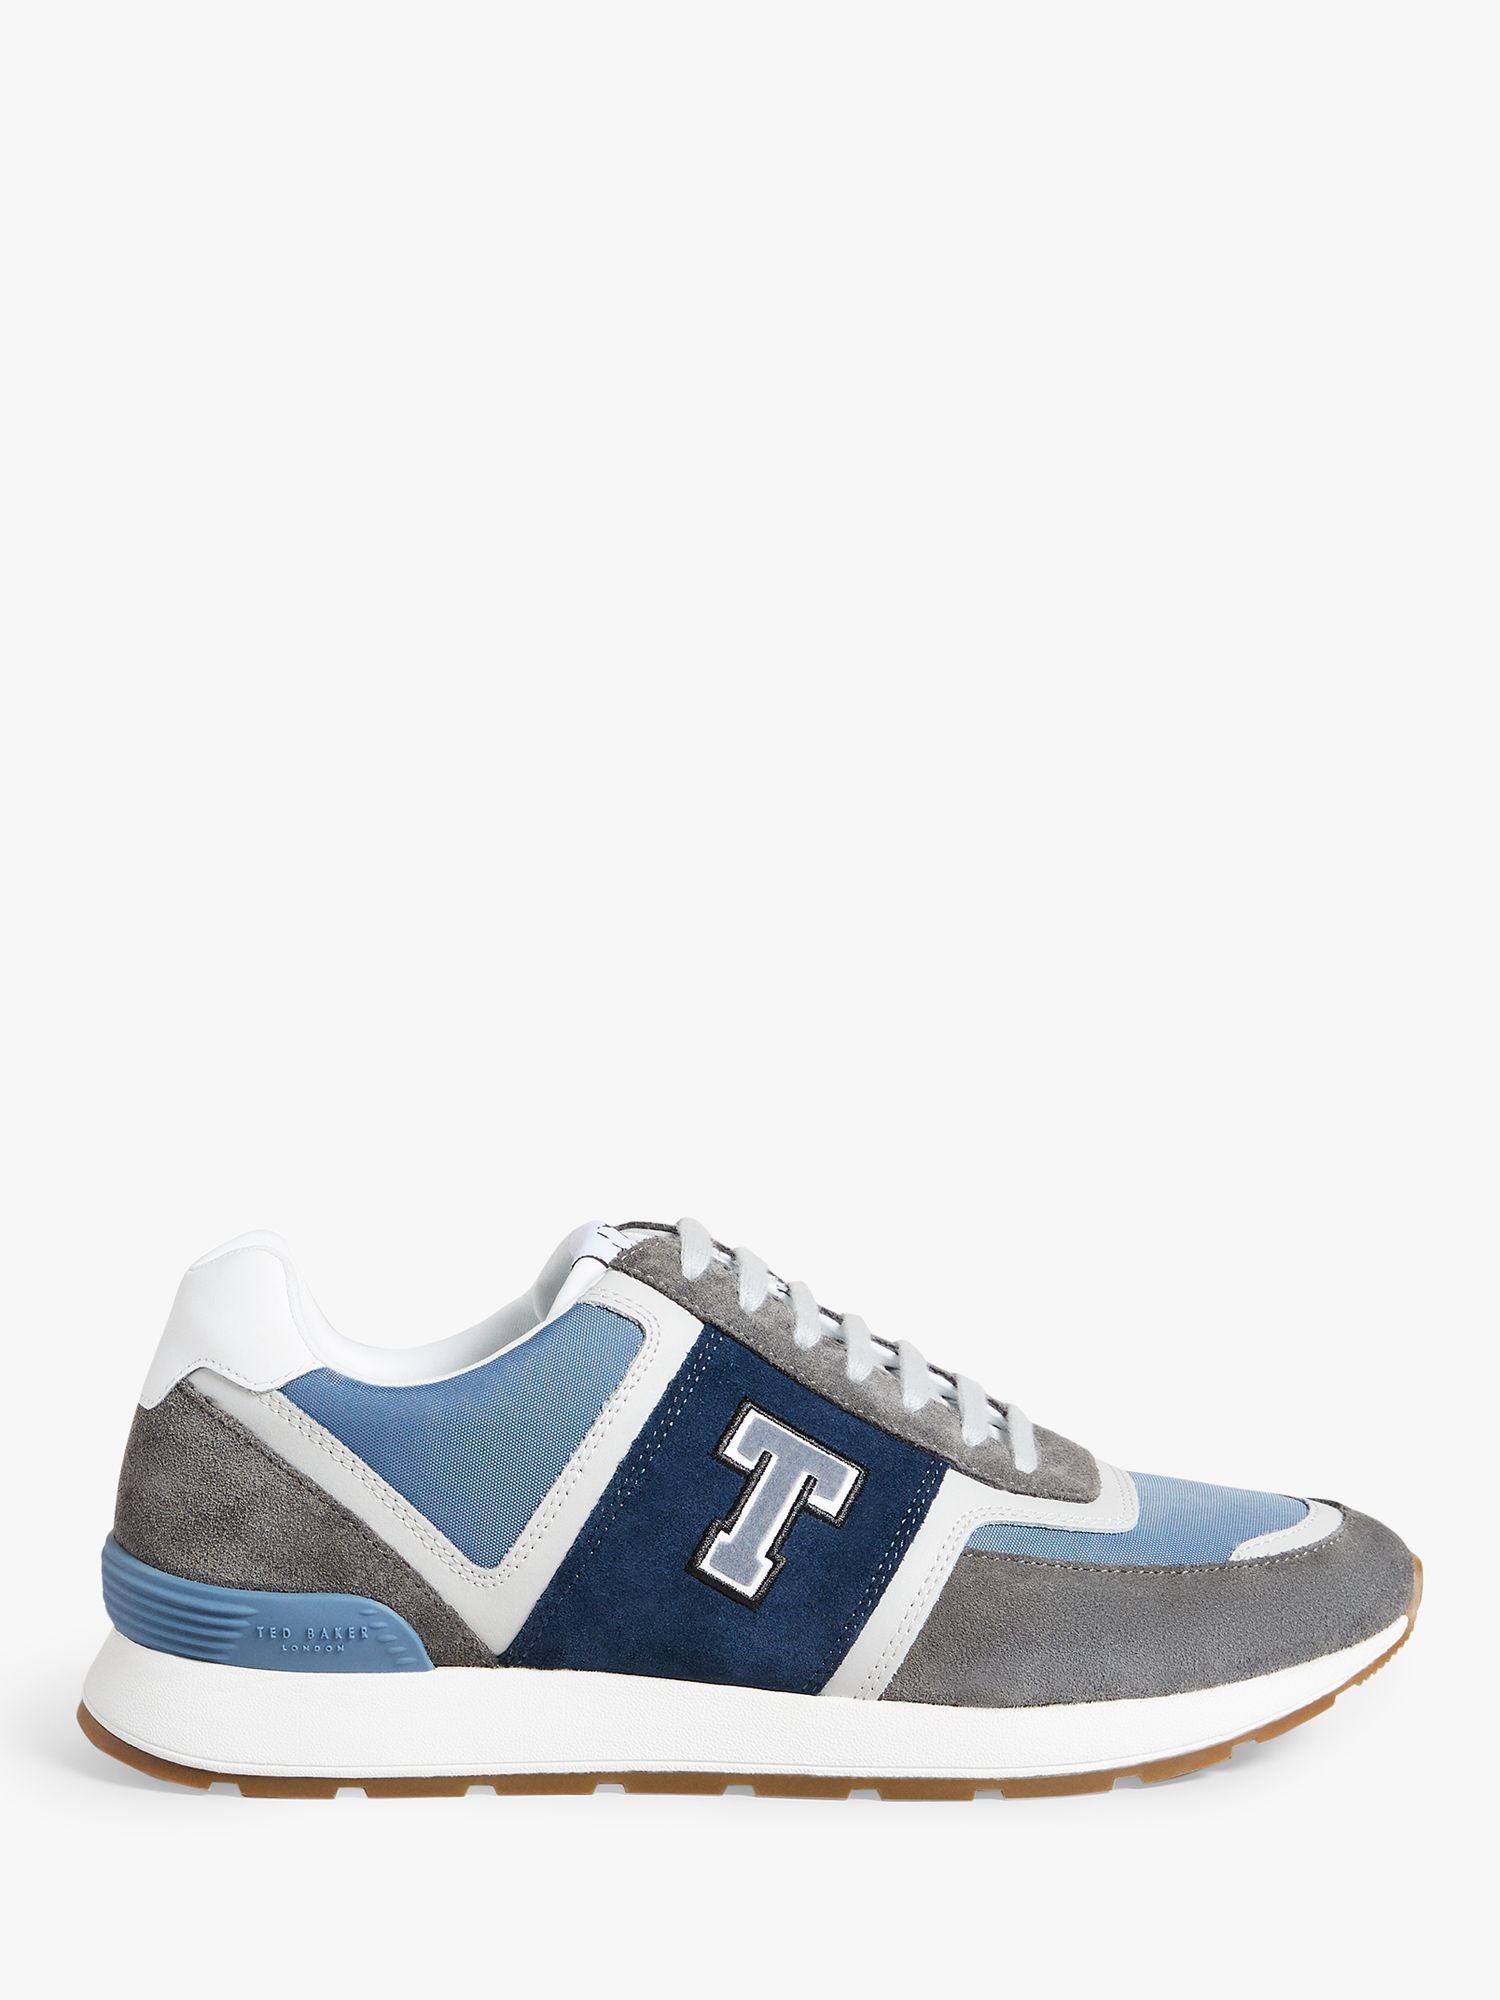 Ted Baker Gregory Lace Up Trainers, Grey/Blue, 6